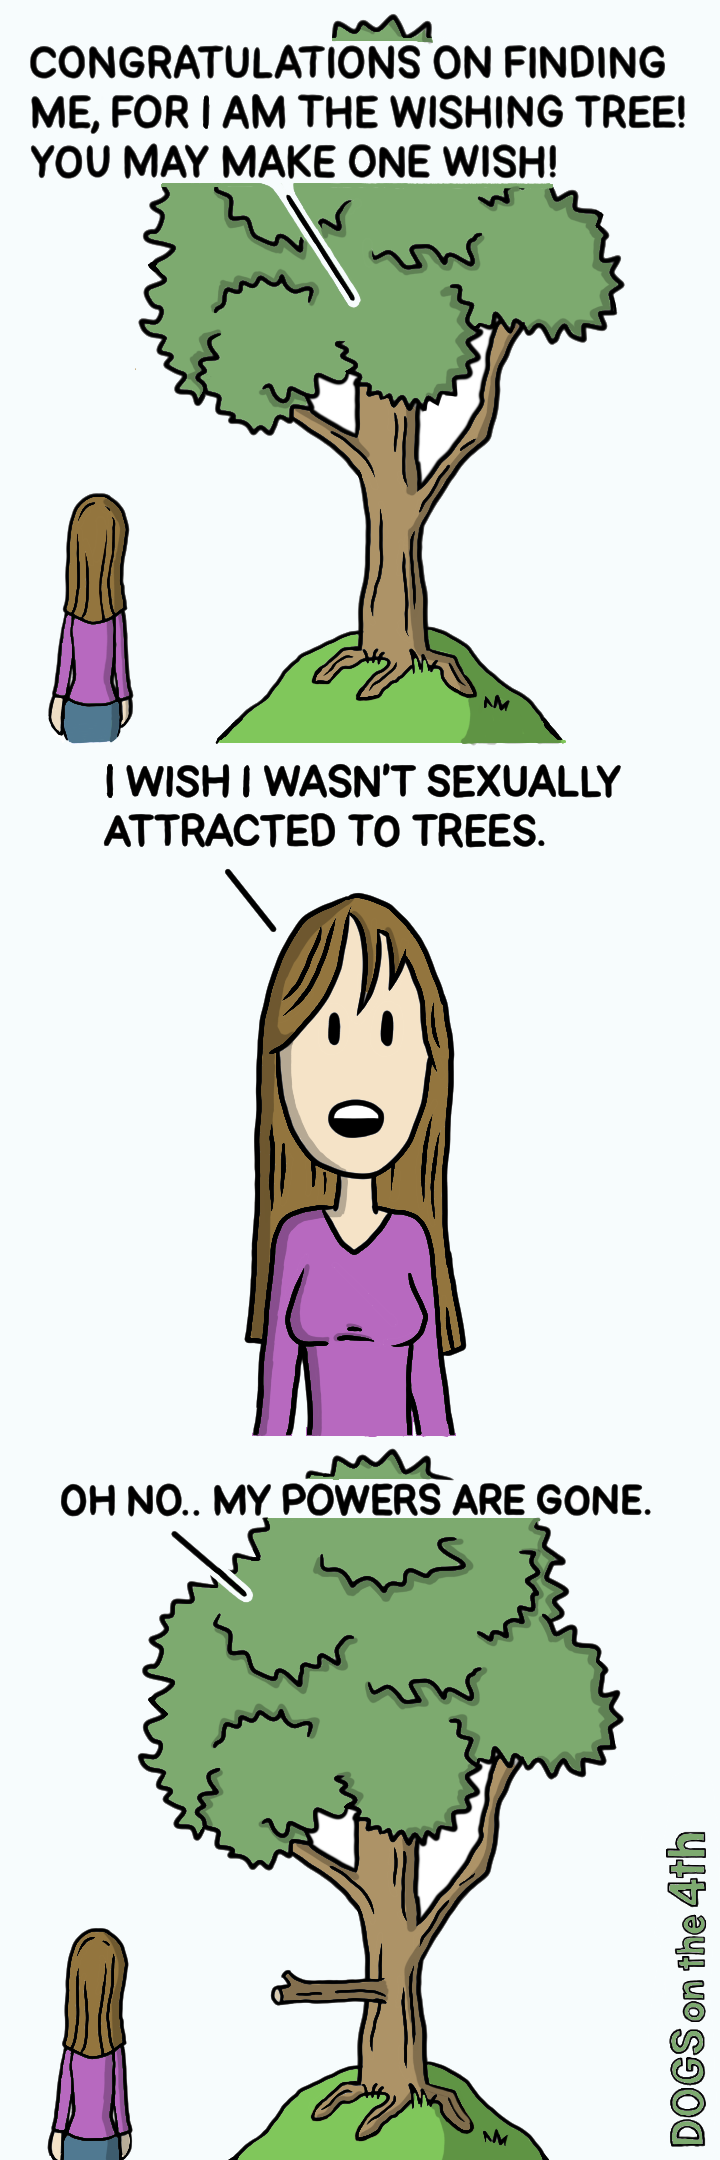 memes - Dendrophilia - Congratulations On Finding Me, For I Am The Wishing Tree! You May Make One Wish! I Wish I Wasn'T Sexually Attracted To Trees. Oh No. My Powers Are Gone. Dogs on the 4th